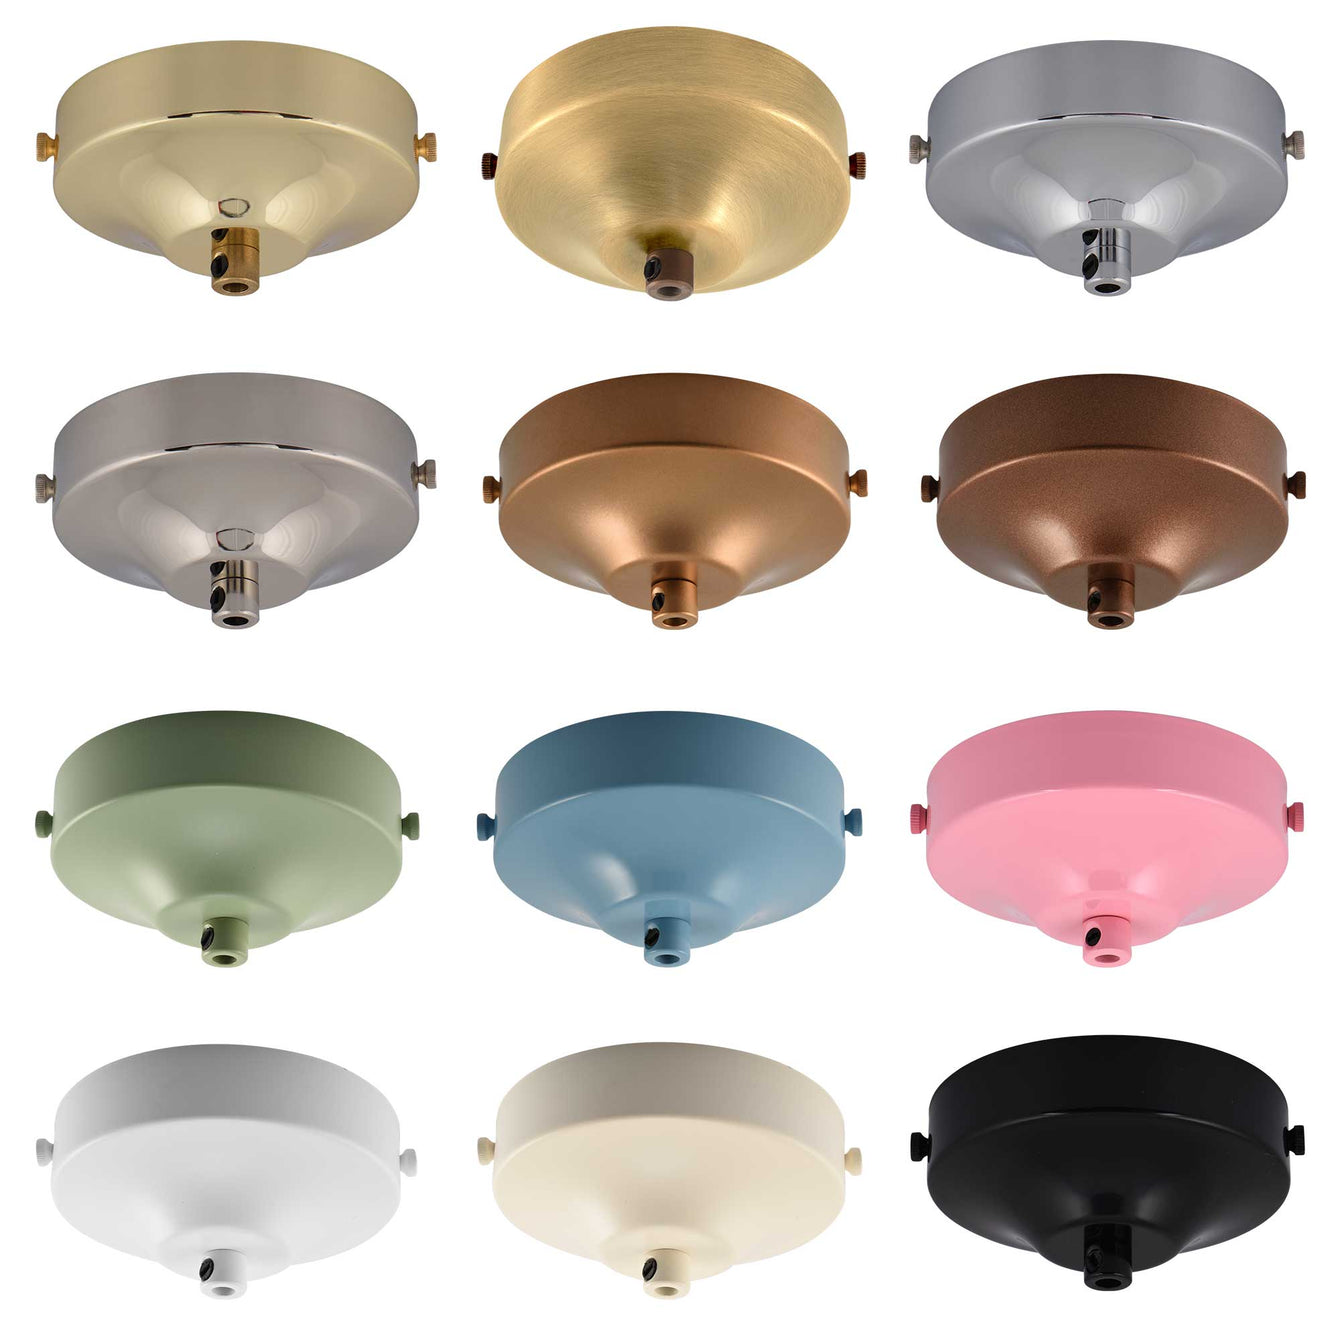 ElekTek 100mm Diameter Convex Ceiling Rose with Strap Bracket and Cord Grip Metallic Finishes Powder Coated Colours Brass